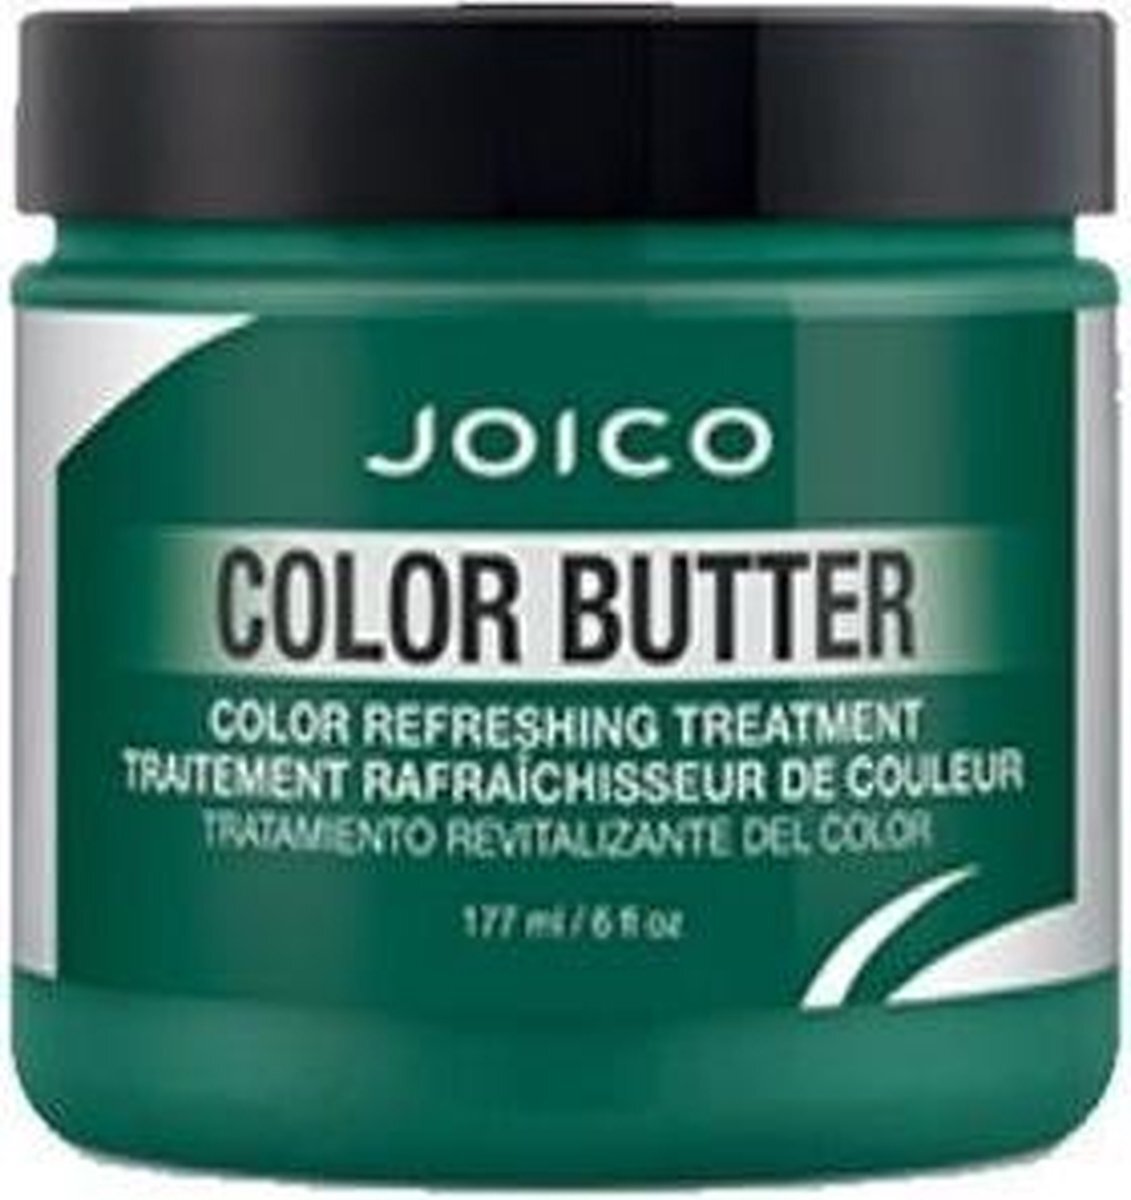 Joico Color Care Butter green 177ml